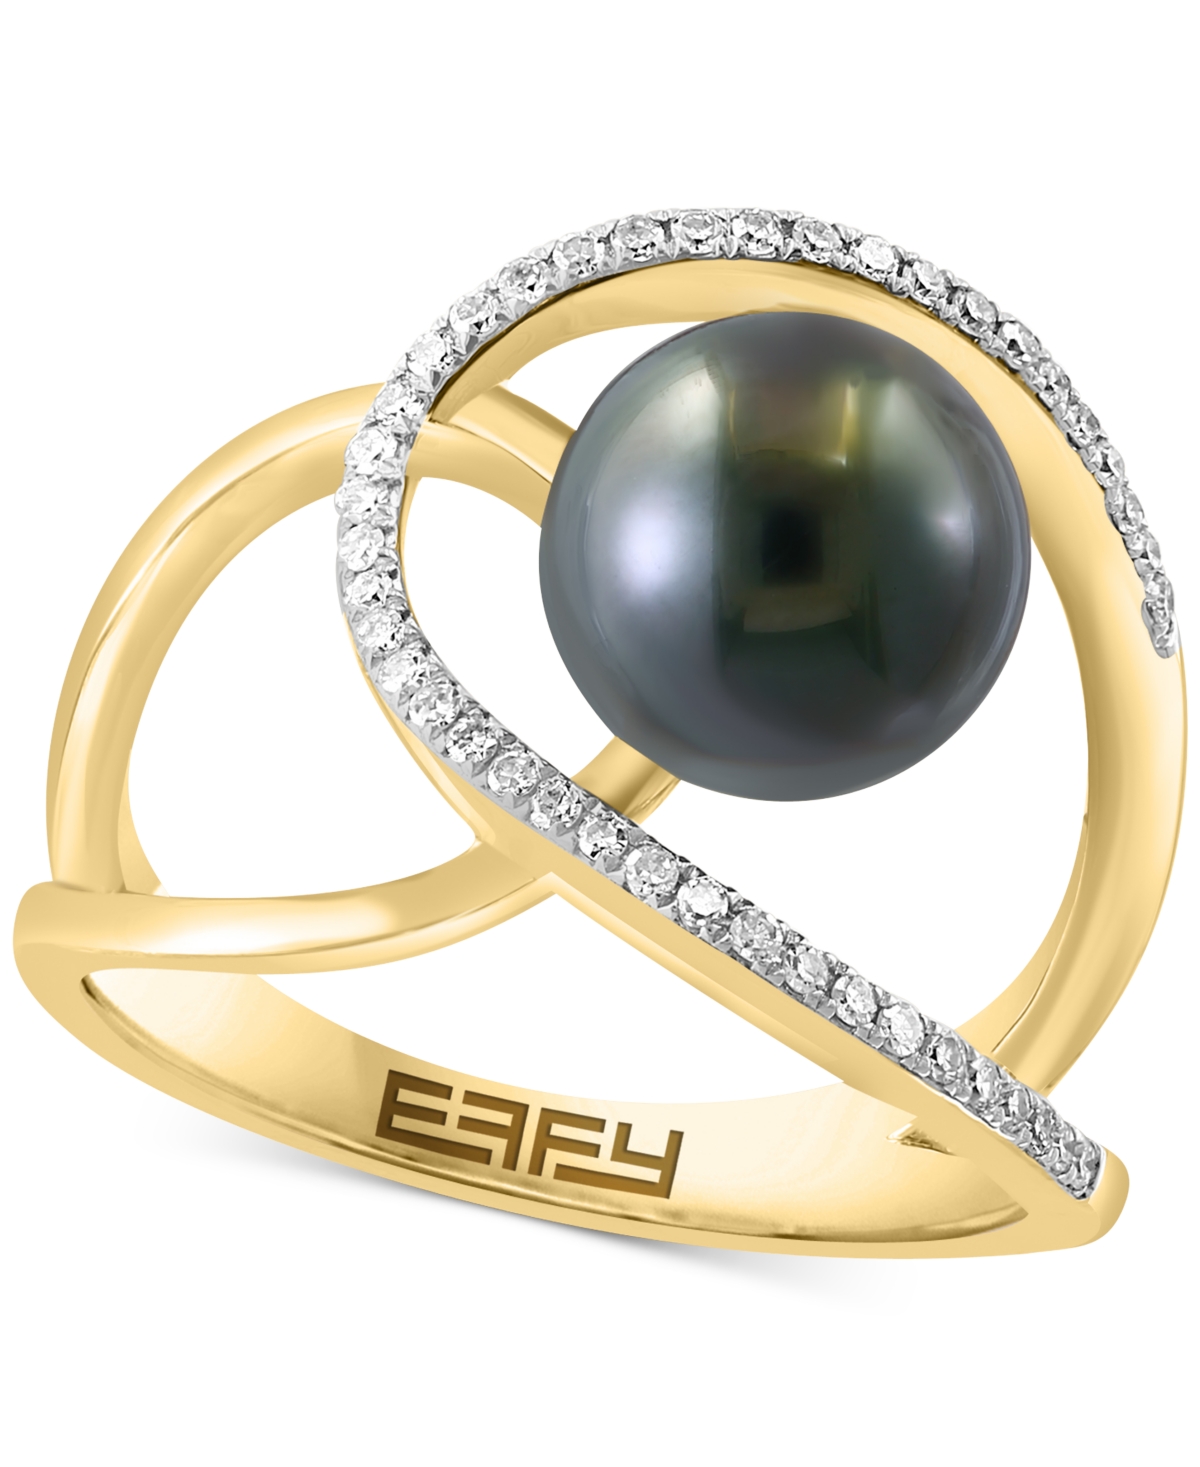 Effy Black Tahitian Pearl (8mm) & Diamond (1/6 ct. t.w.) Abstract Openwork Statement Ring in 14k Gold - Yellow Gol